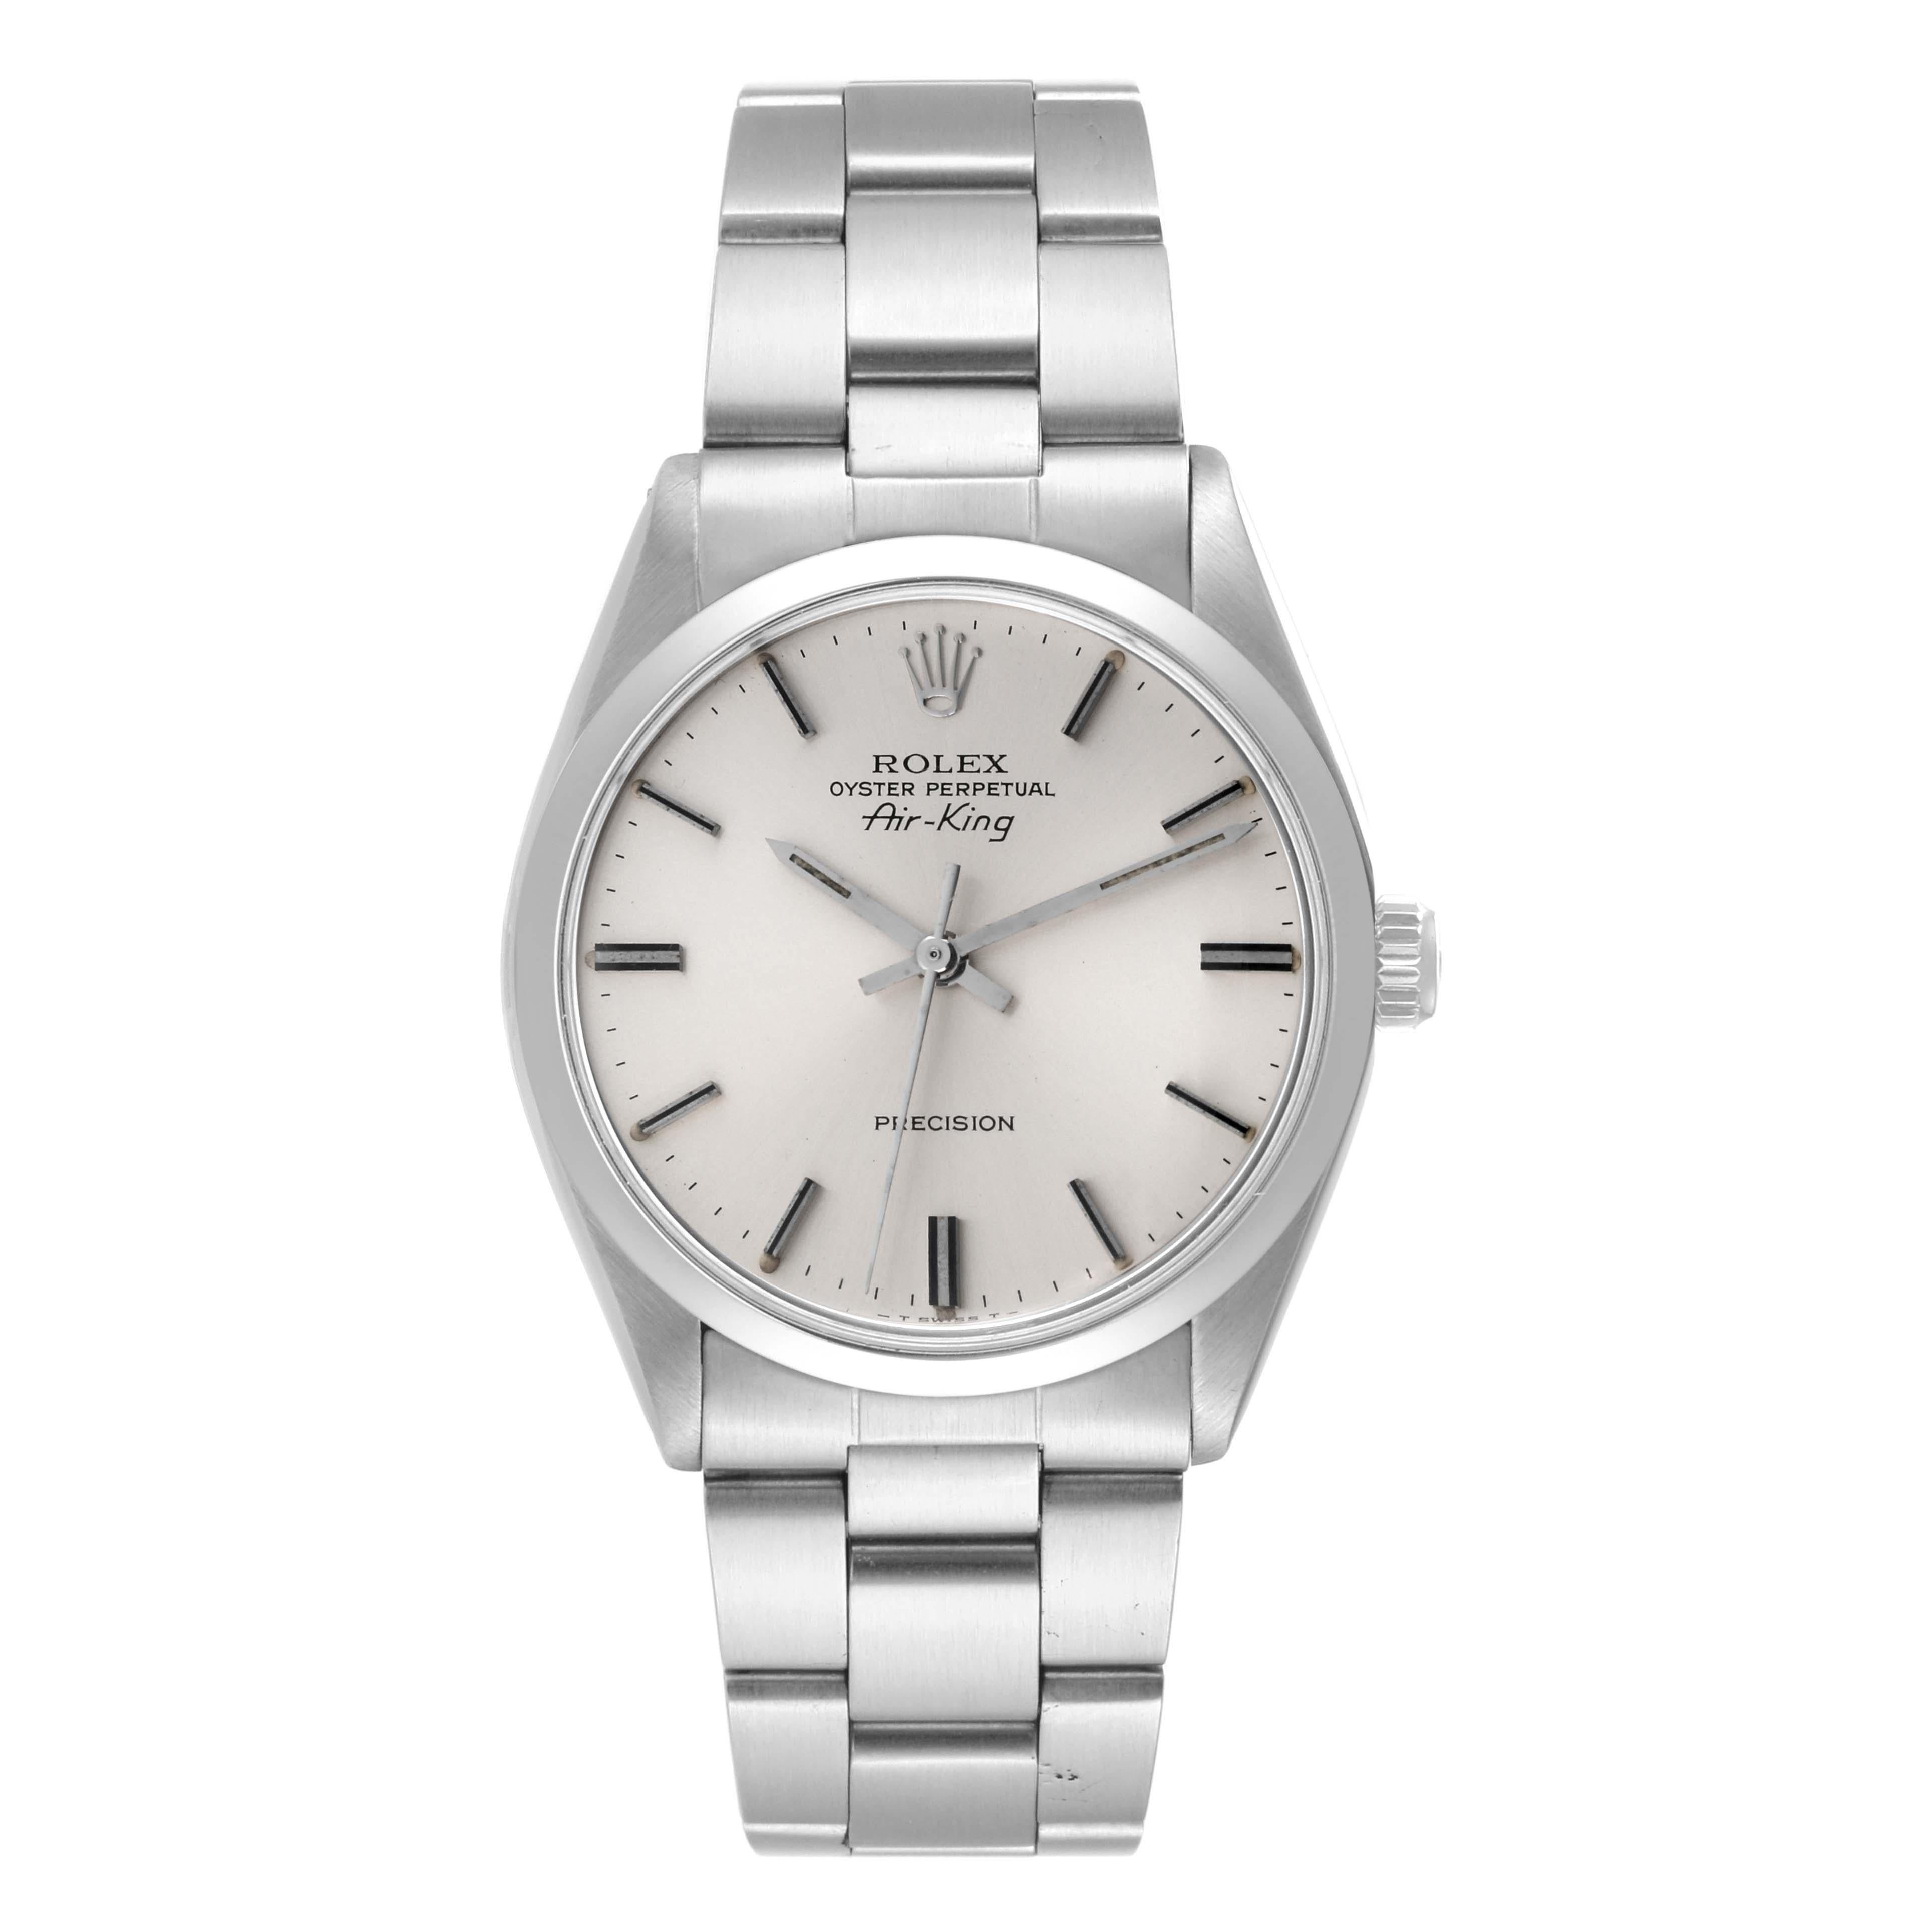 Rolex Air King Precision Silver Dial Vintage Steel Mens Watch 5500 Papers. Automatic self-winding movement. Stainless steel case 34.0 mm in diameter.  Rolex logo on the crown. Stainless steel smooth bezel. Domed acrylic crystal. Silver dial with